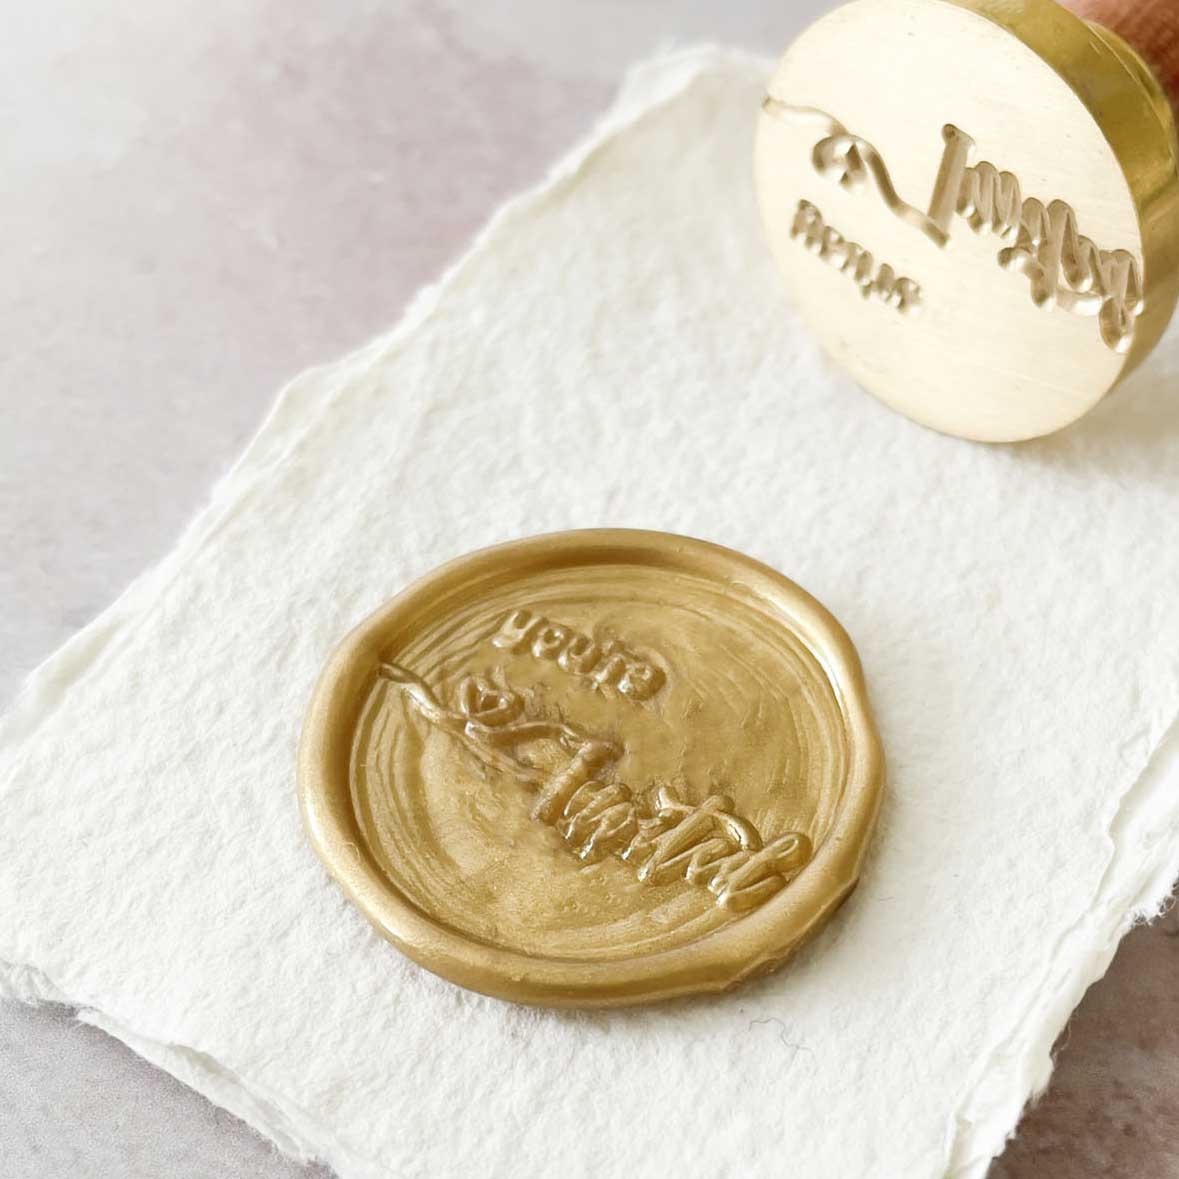 You're Invited - Wax Stamp  ImagineDIY   